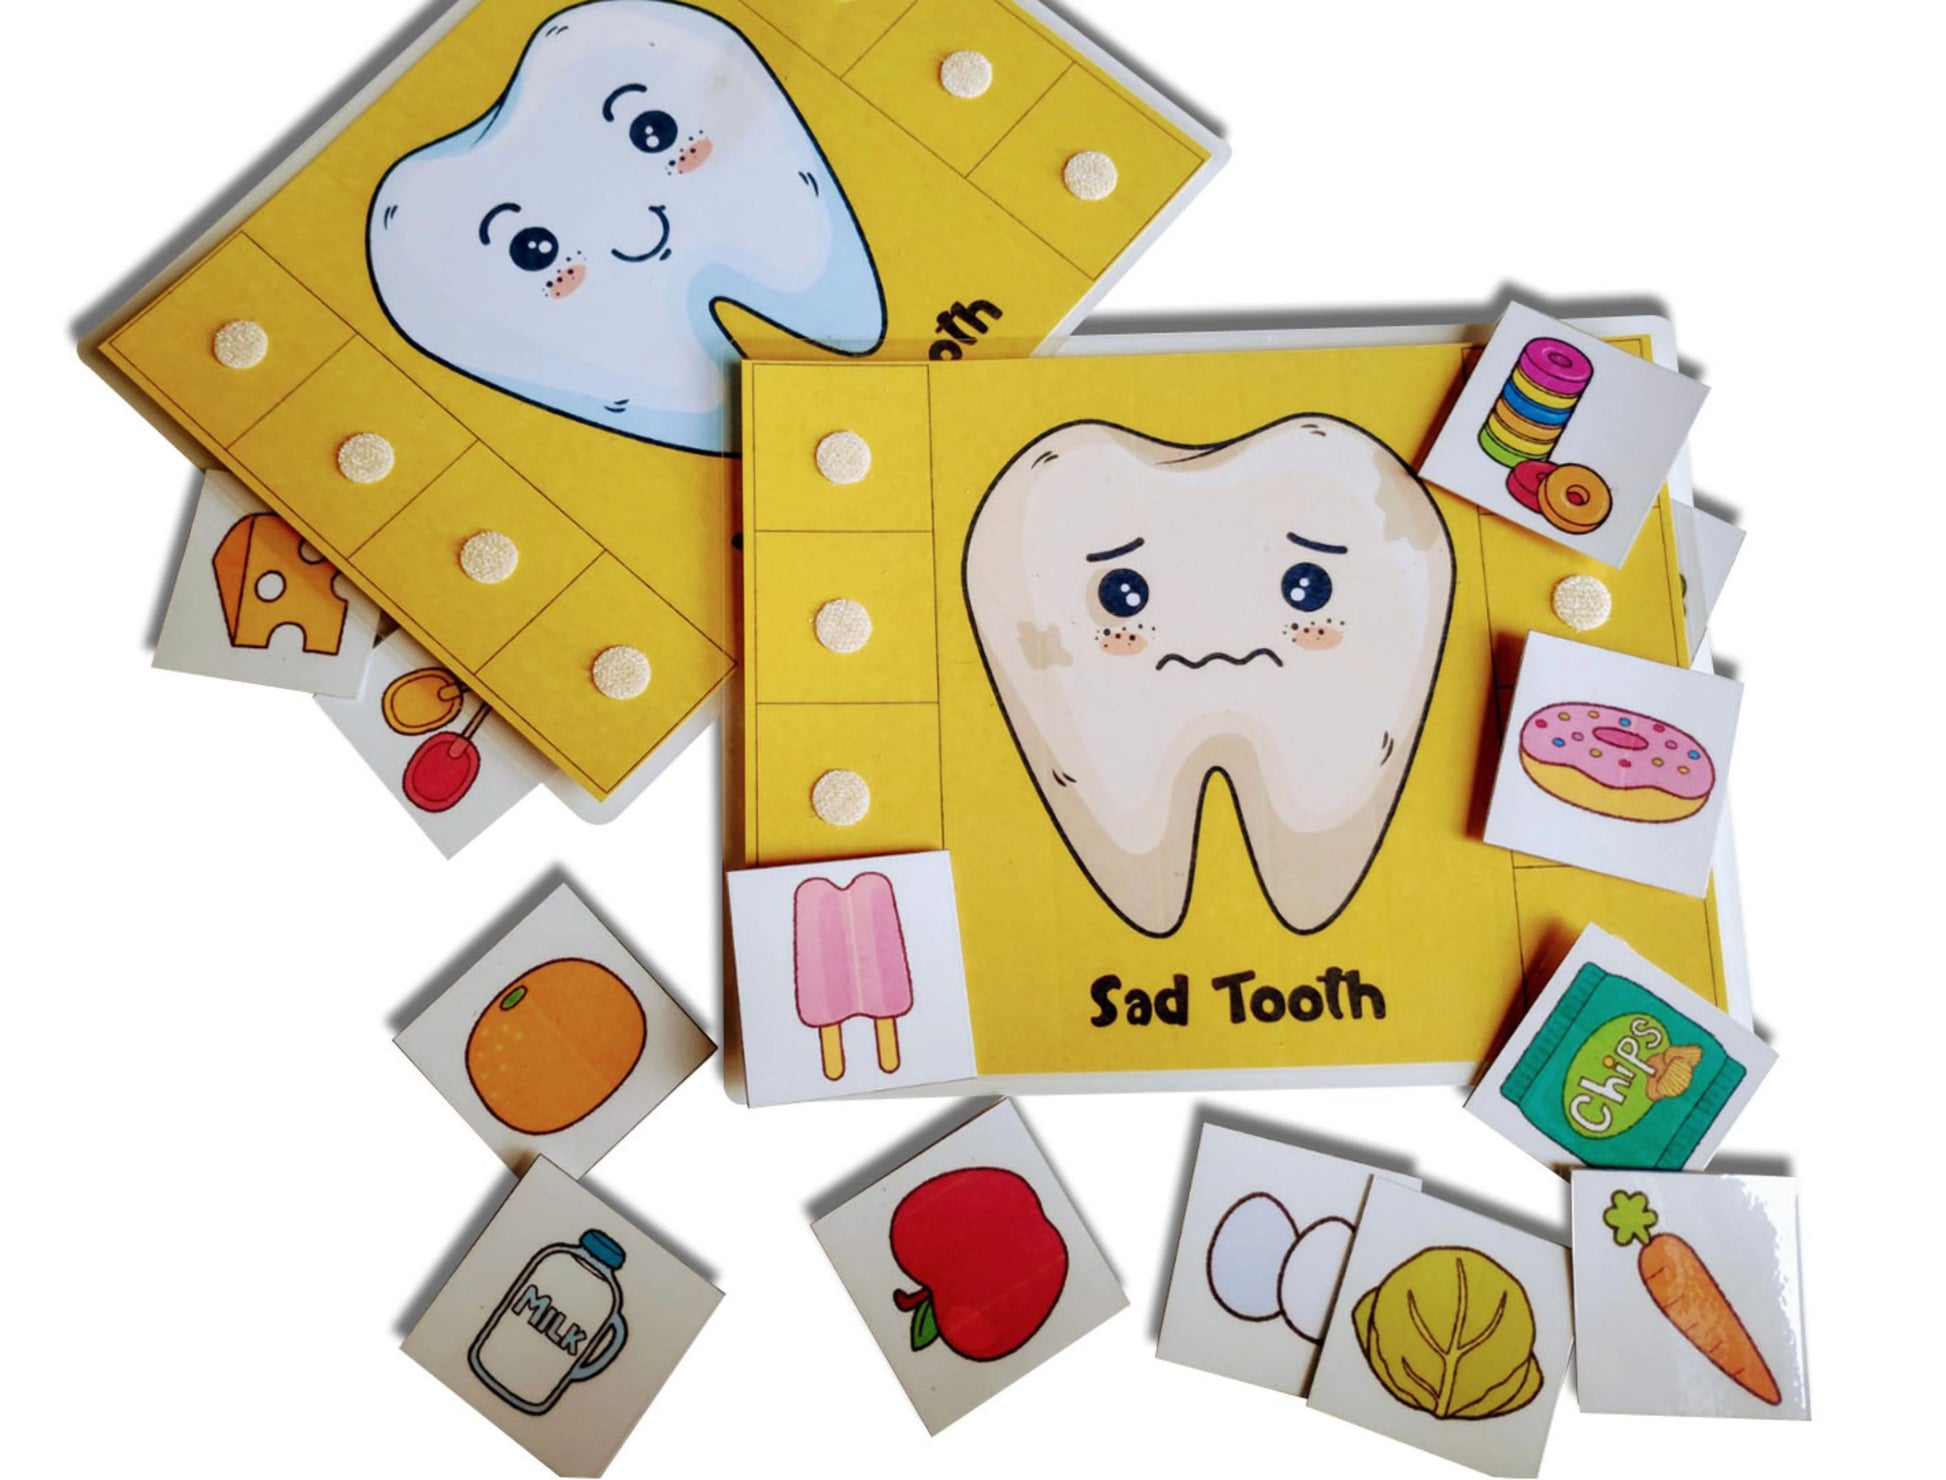 Buy Happy Tooth Sad Tooth Sorting Activity Game Fun Learning - SkilloToys.com